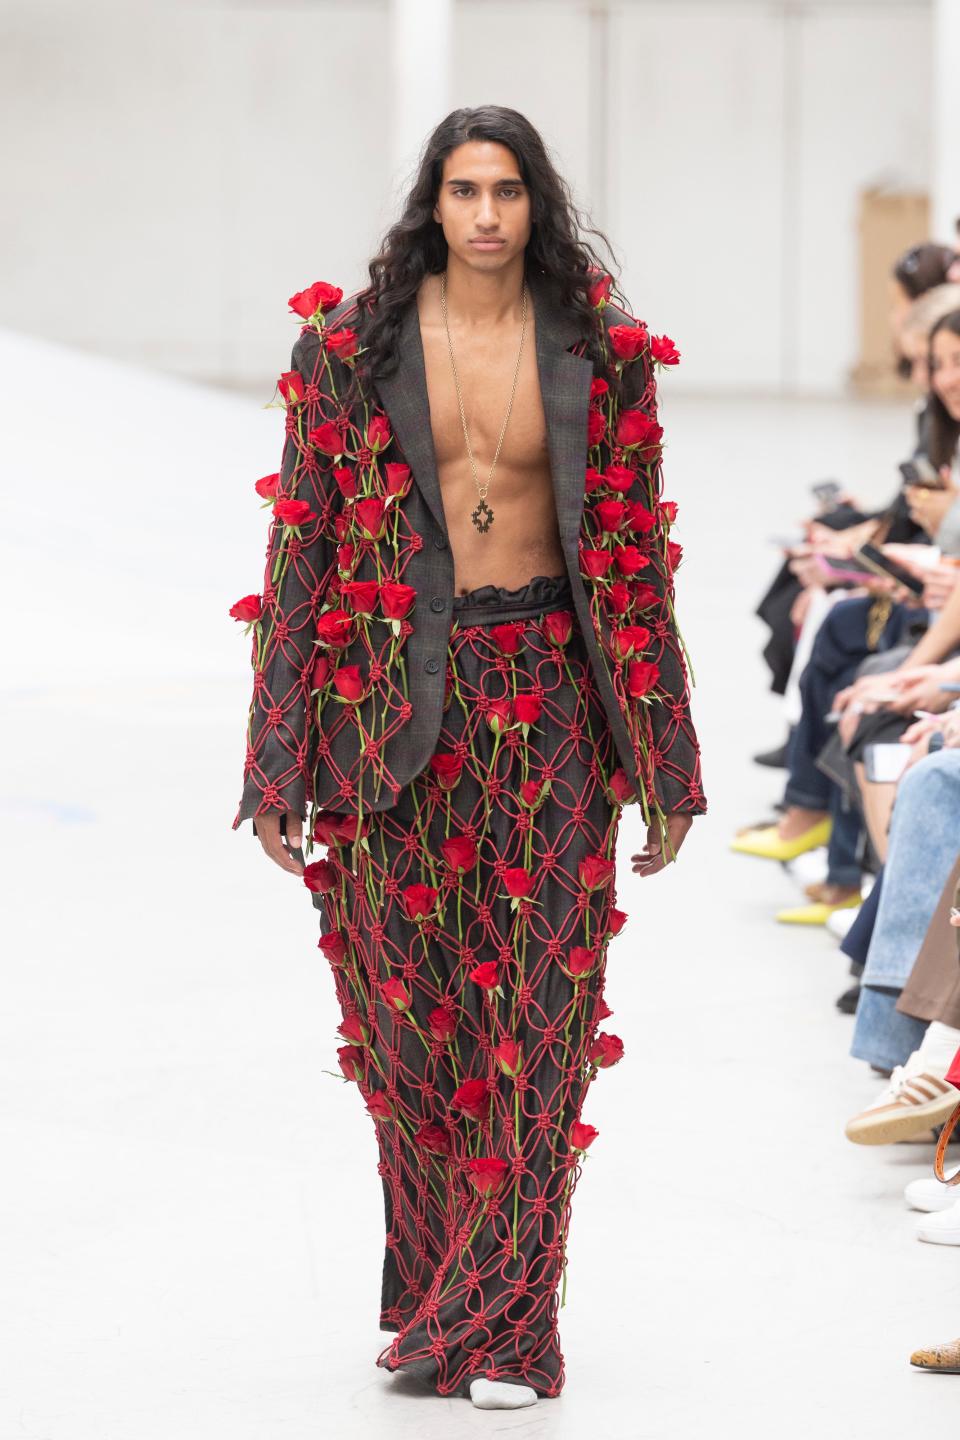 A runway model at the Rolf Ekroth show wearing a grey suit covered in fresh red stemmed roses